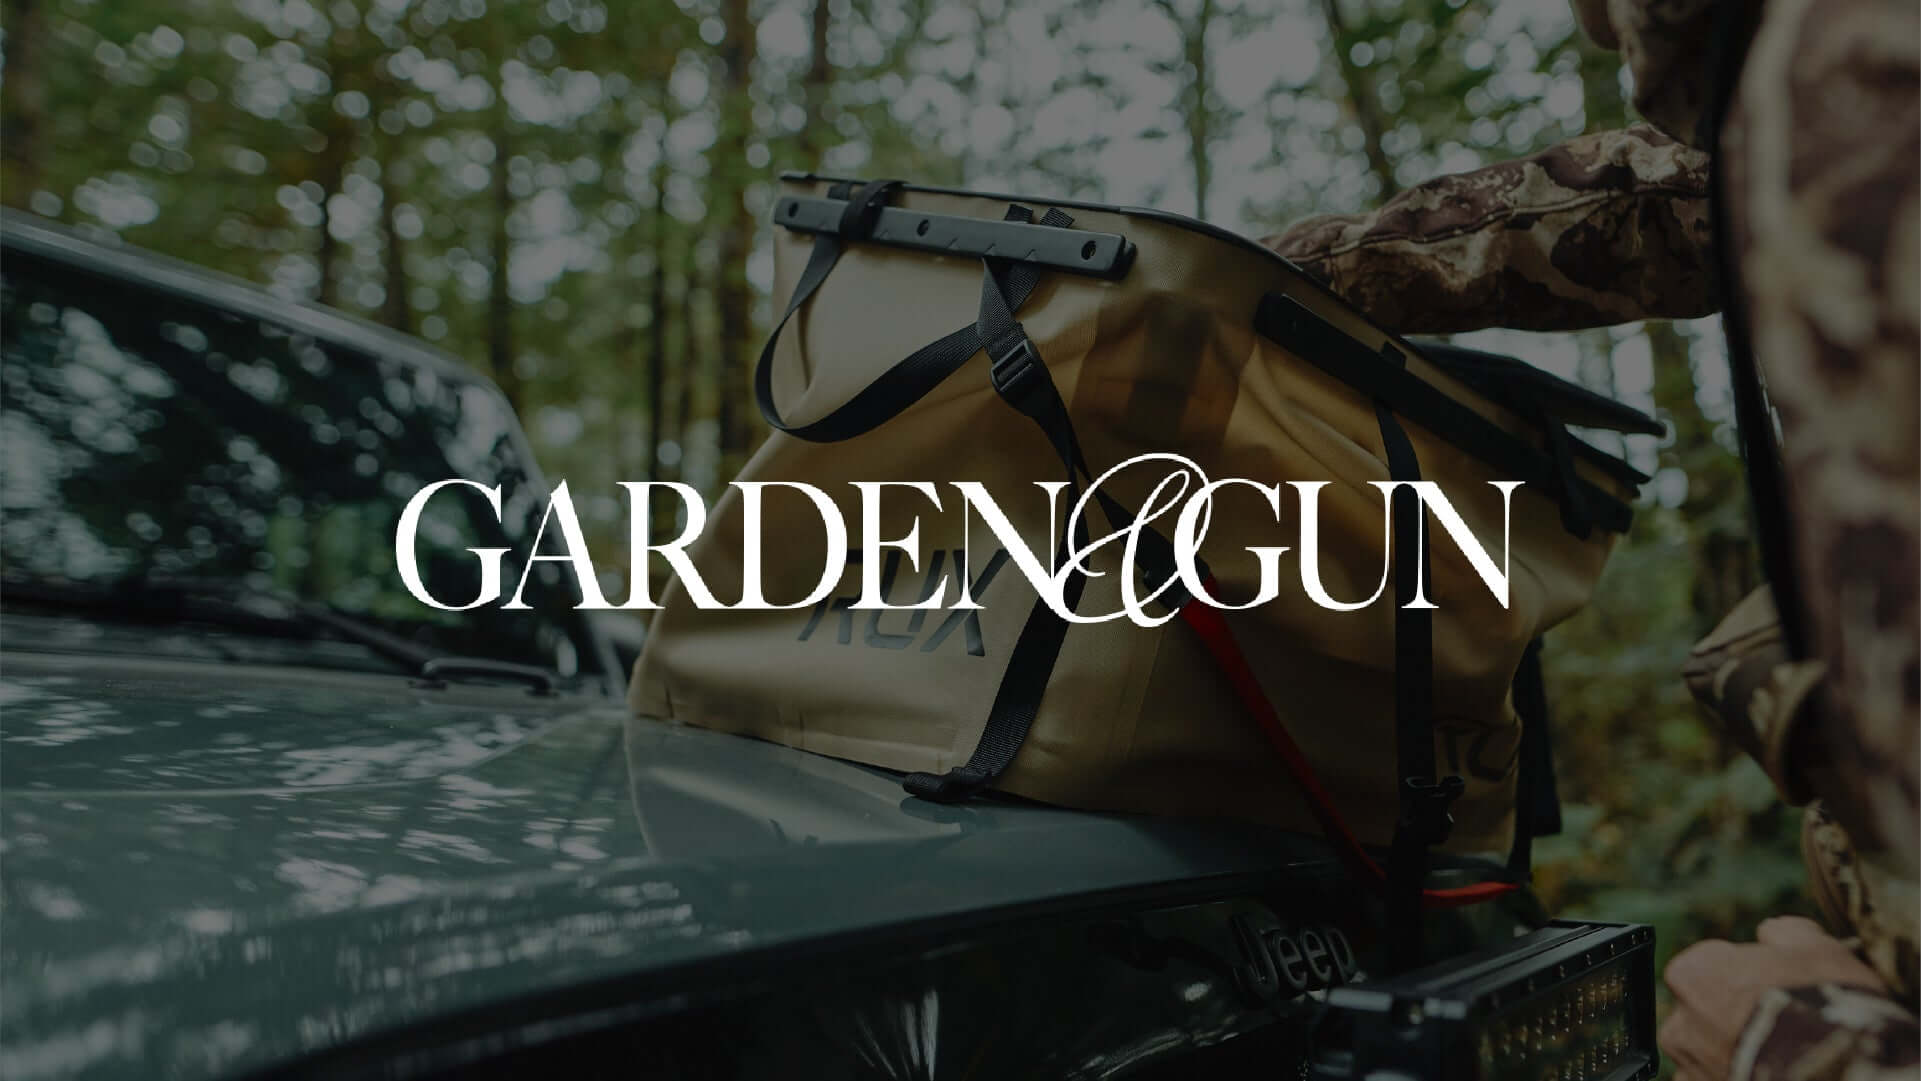 The RUX 70L is featured in Garden & Gun’s “Gifts for Sporting and Outdoor Lovers”